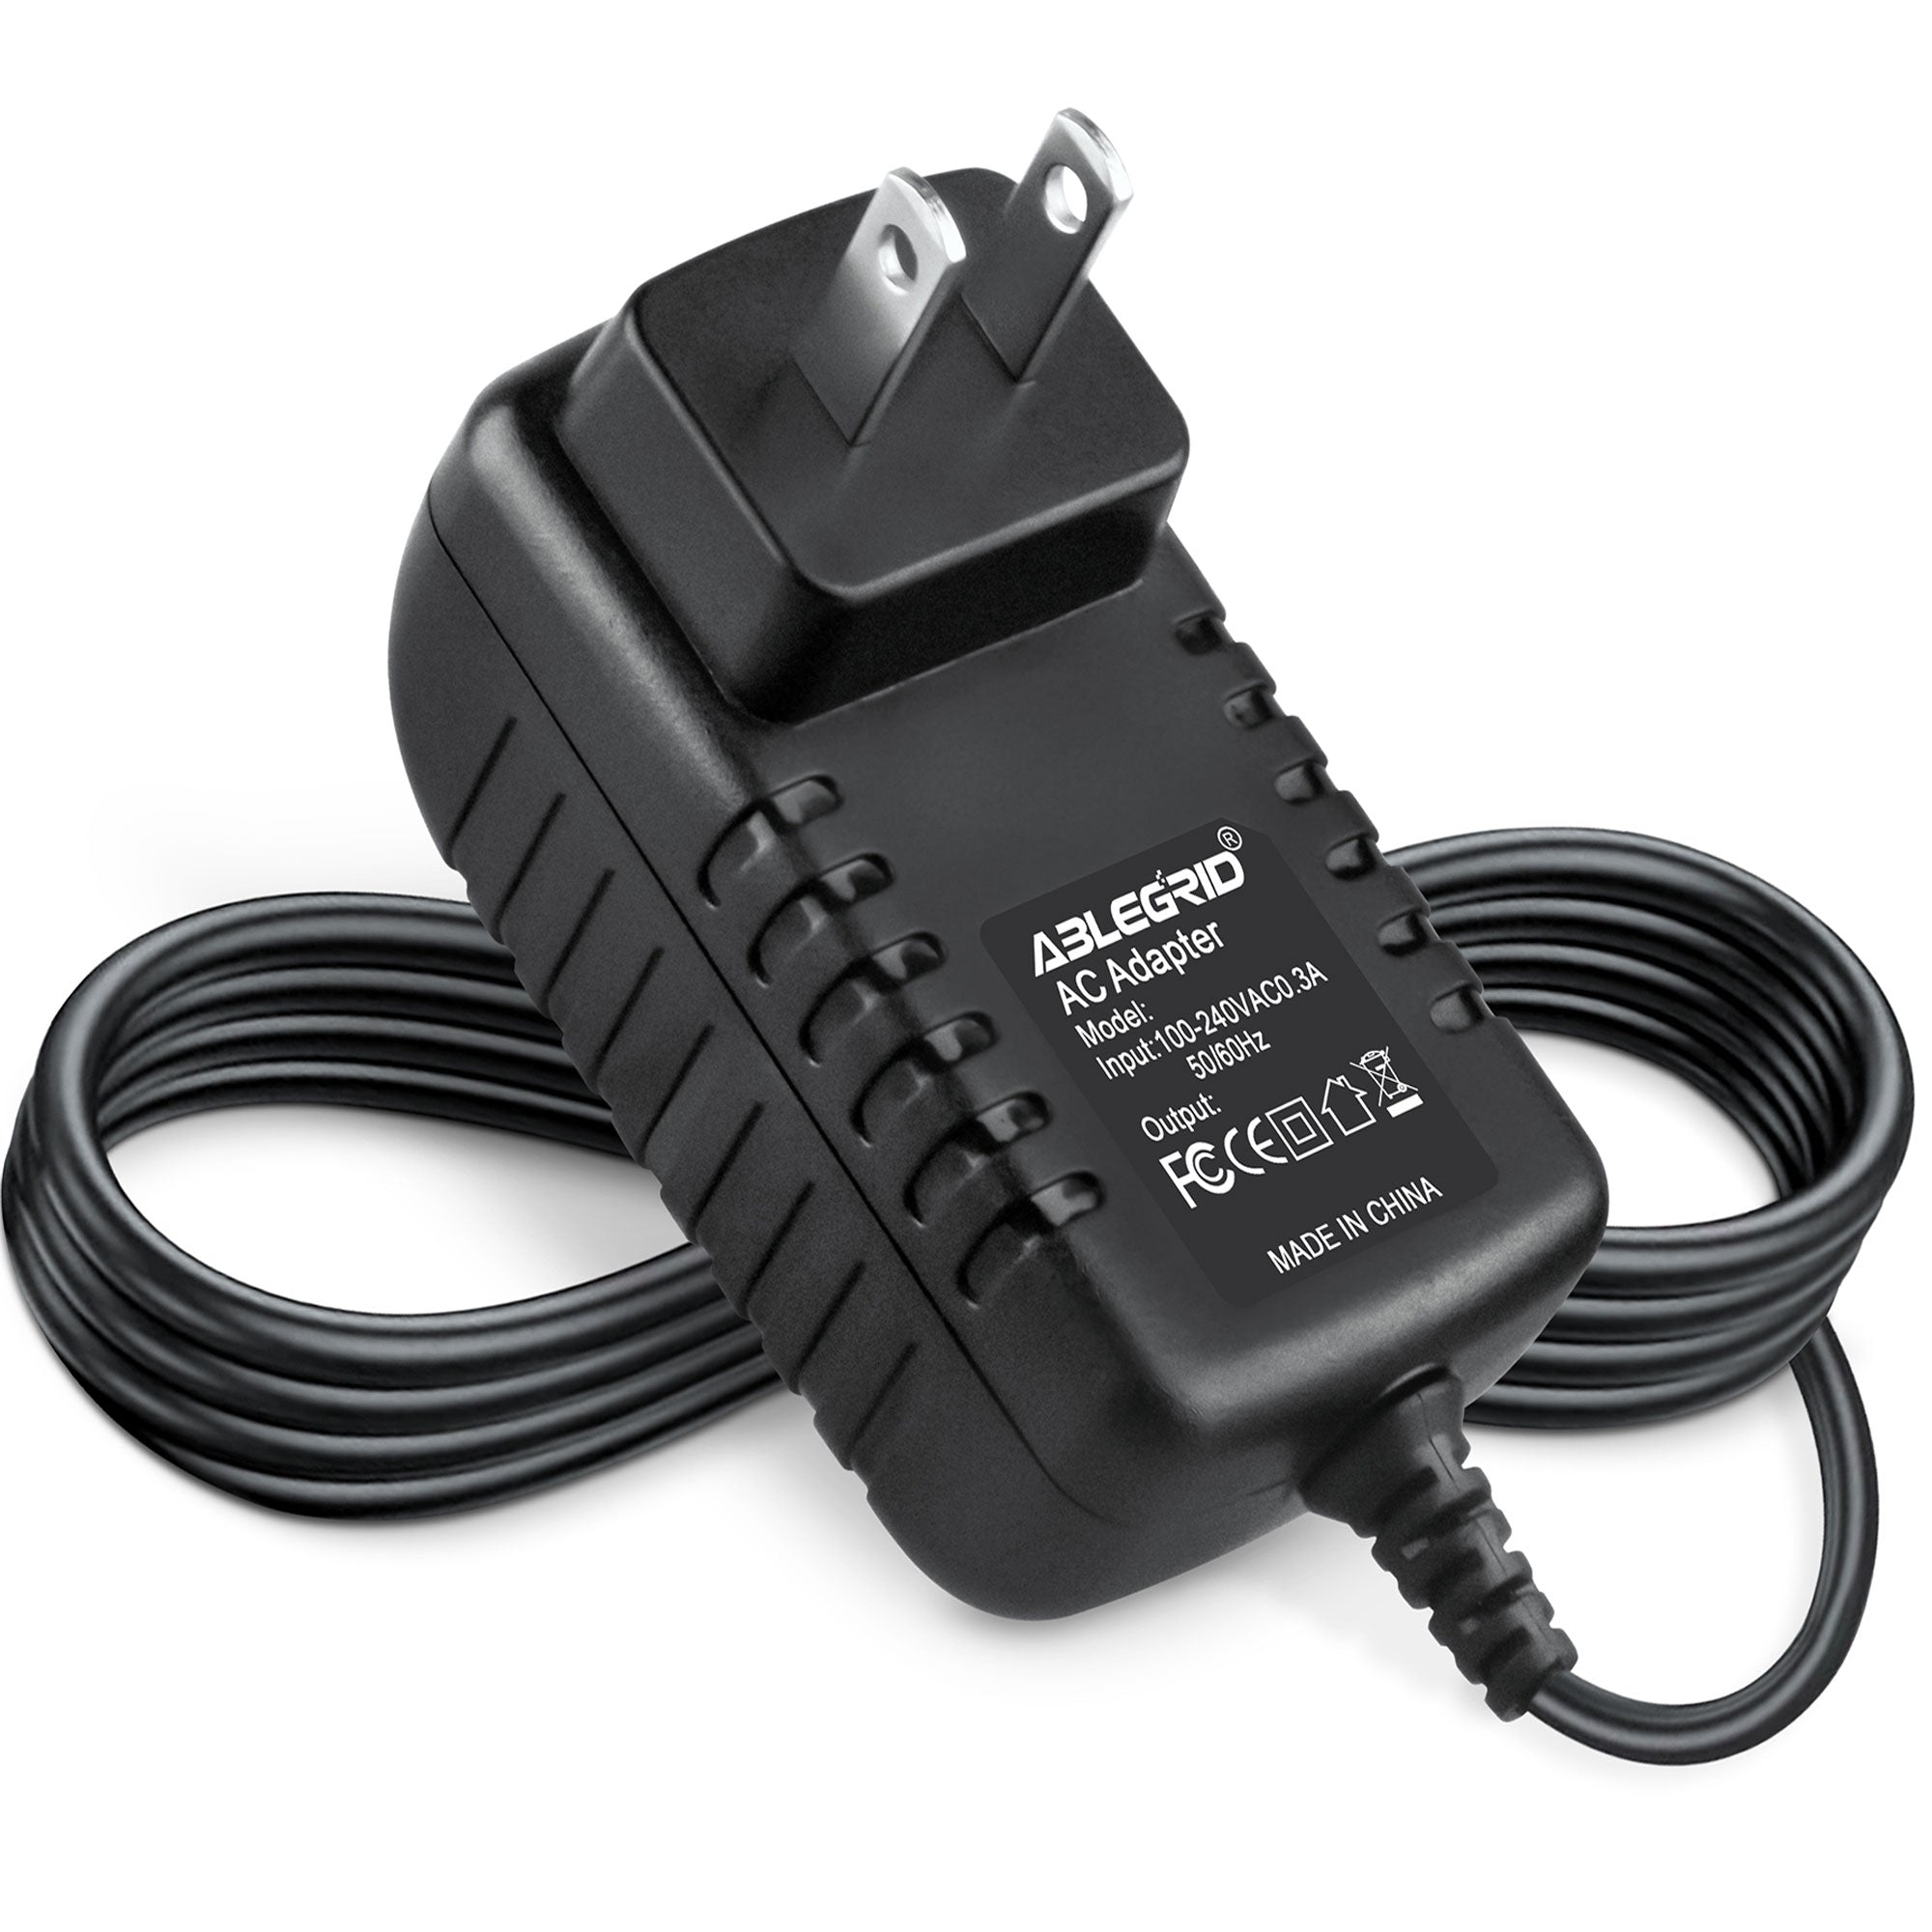 AbleGrid AC / DC Adapter for Cobra MicroTalk PR260WX, PR260-2WXVP, PR4800WX, PR4800WXC 2-Way Radio Power Supply Cord Cable PS Charger Input: 100 - 240 VAC 50/60Hz Worldwide Voltage Use PSU